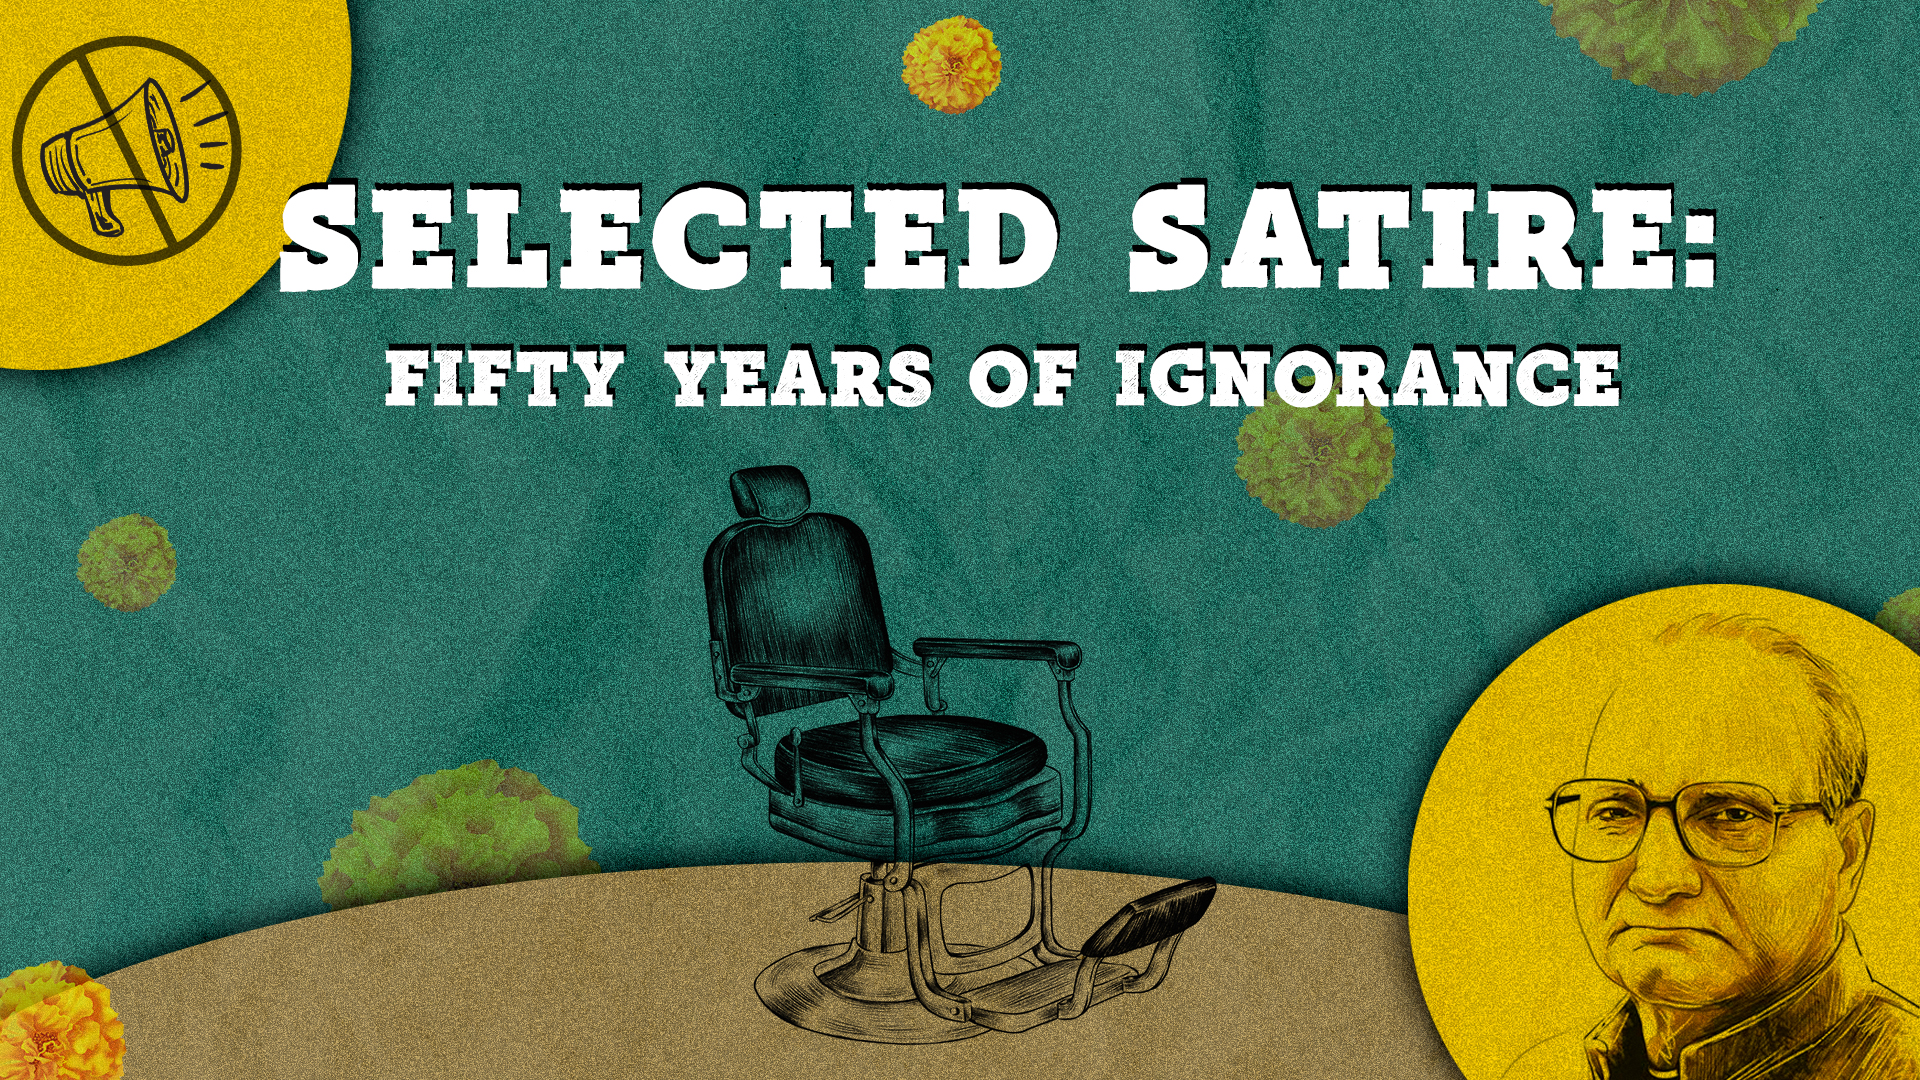 Probing the Indian Heartland for Humour in Shrilal Shukla’s The Selected Satire Fifty Years of Ignorance